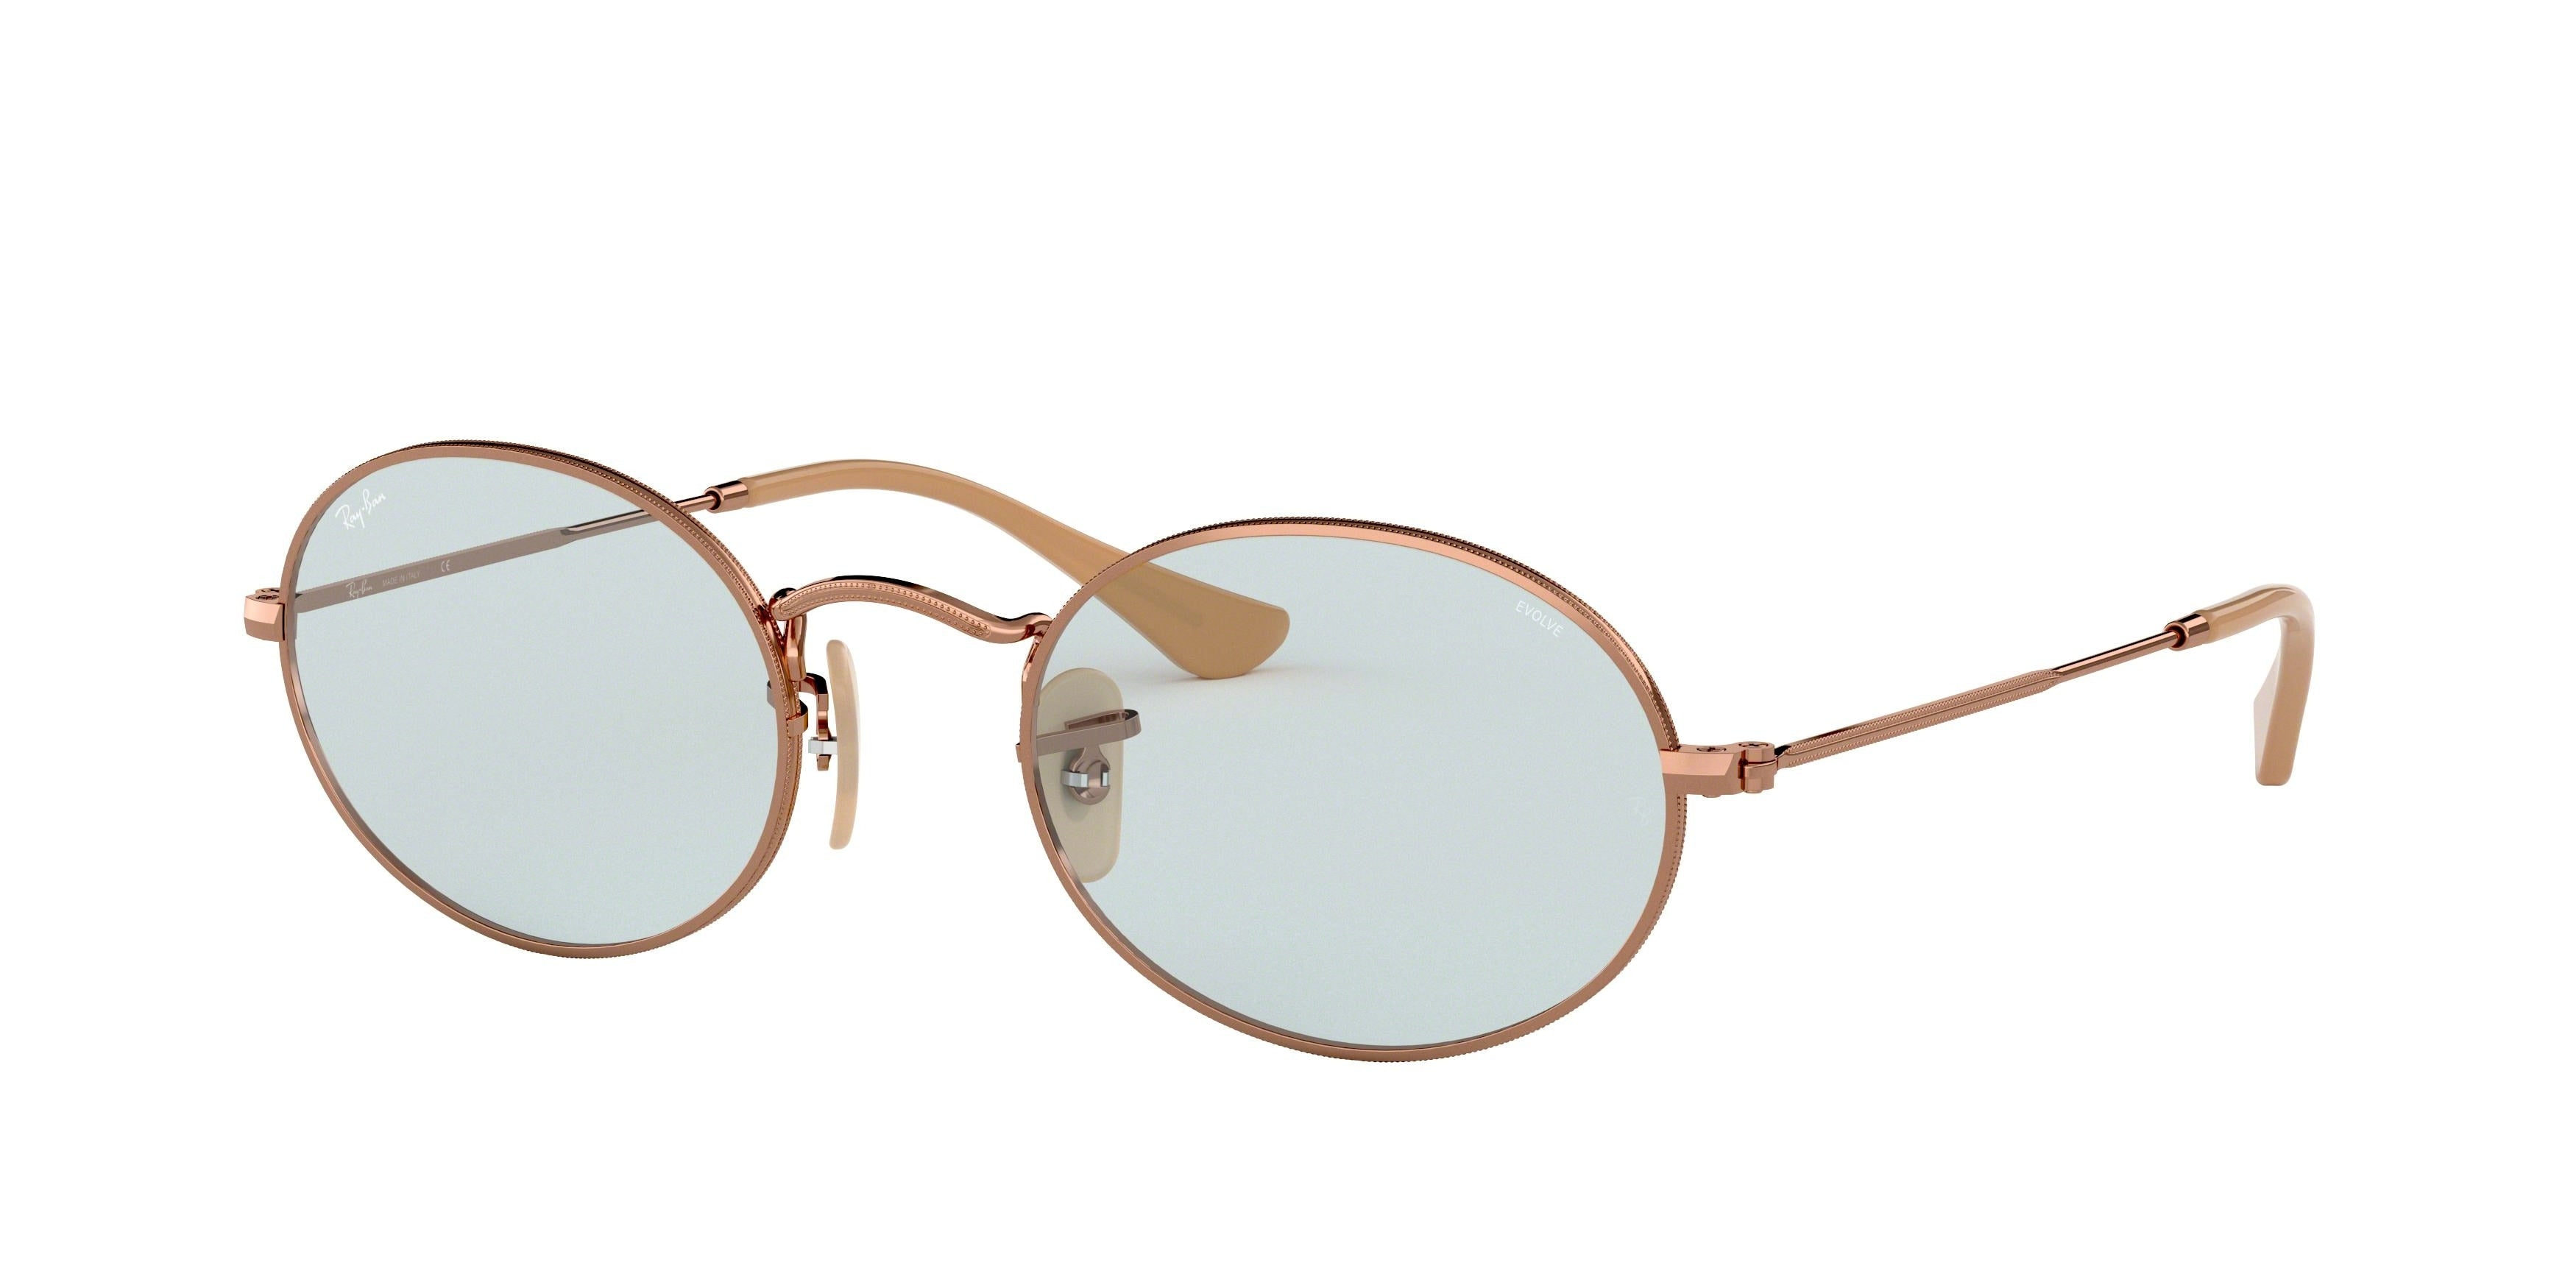 Ray-Ban OVAL RB3547N Oval Sunglasses  91310Y-Copper 53-145-21 - Color Map Copper